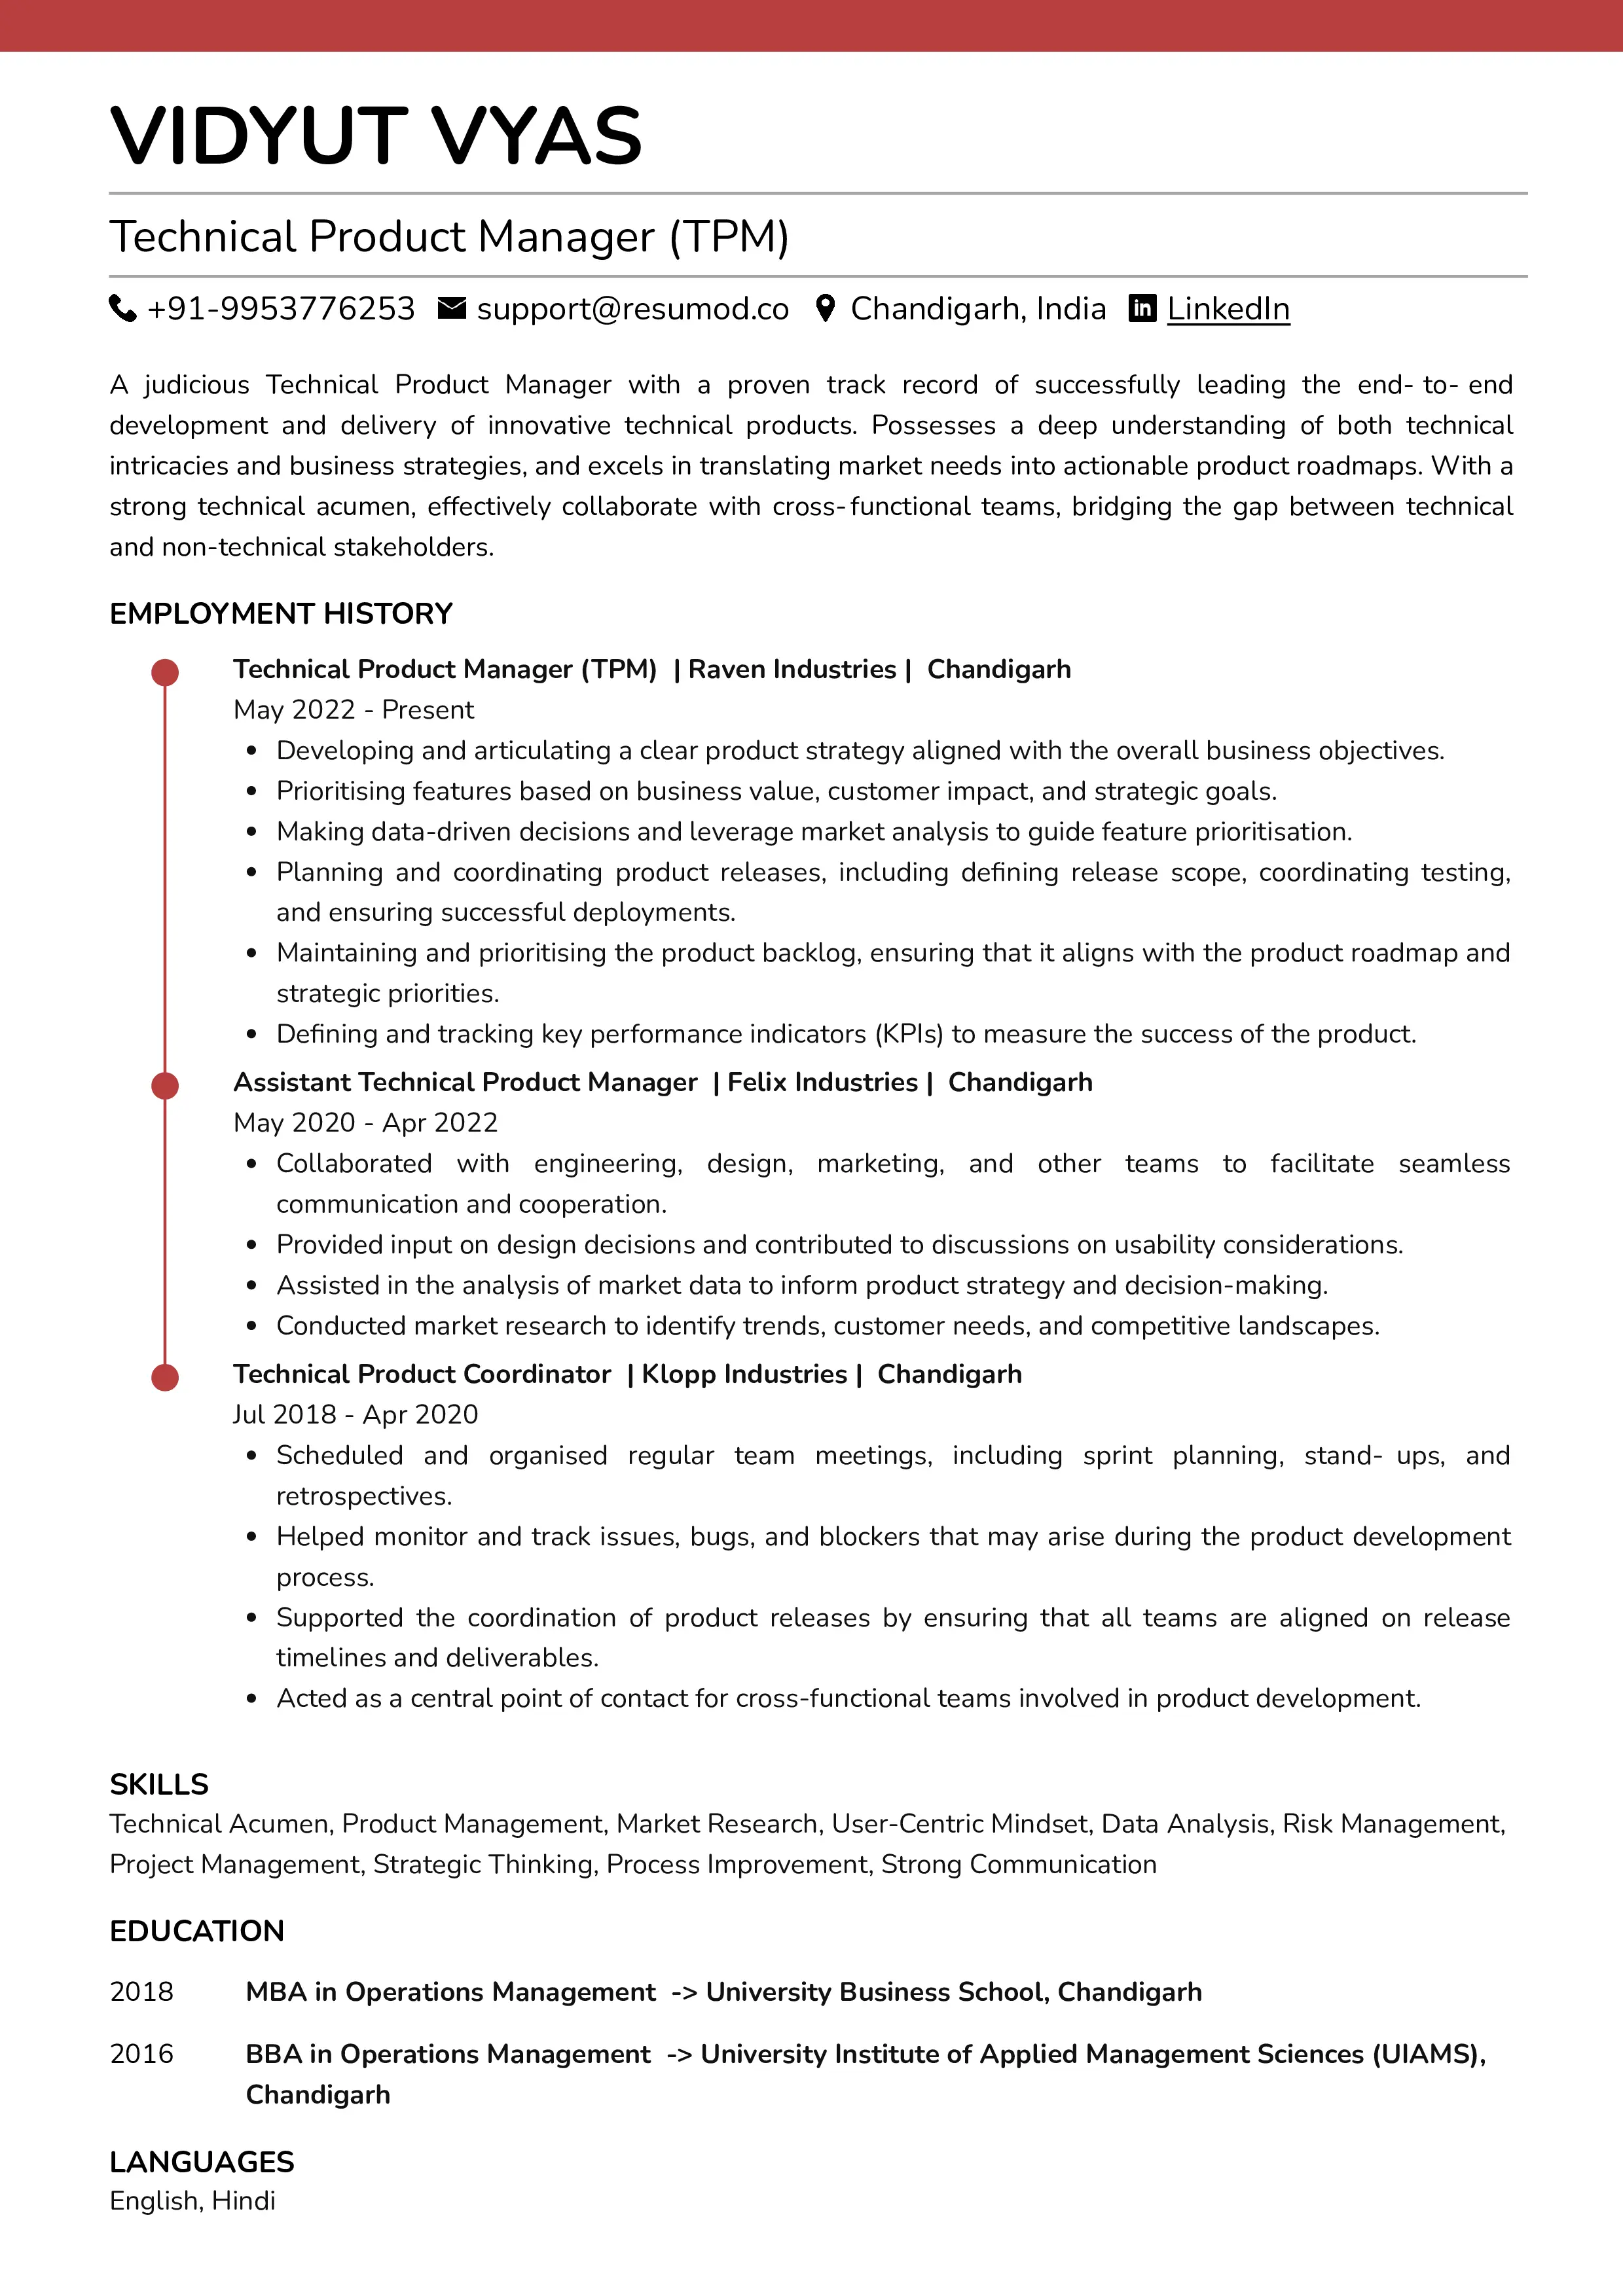 Sample Resume of Technical Product Manager | Free Resume Templates & Samples on Resumod.co